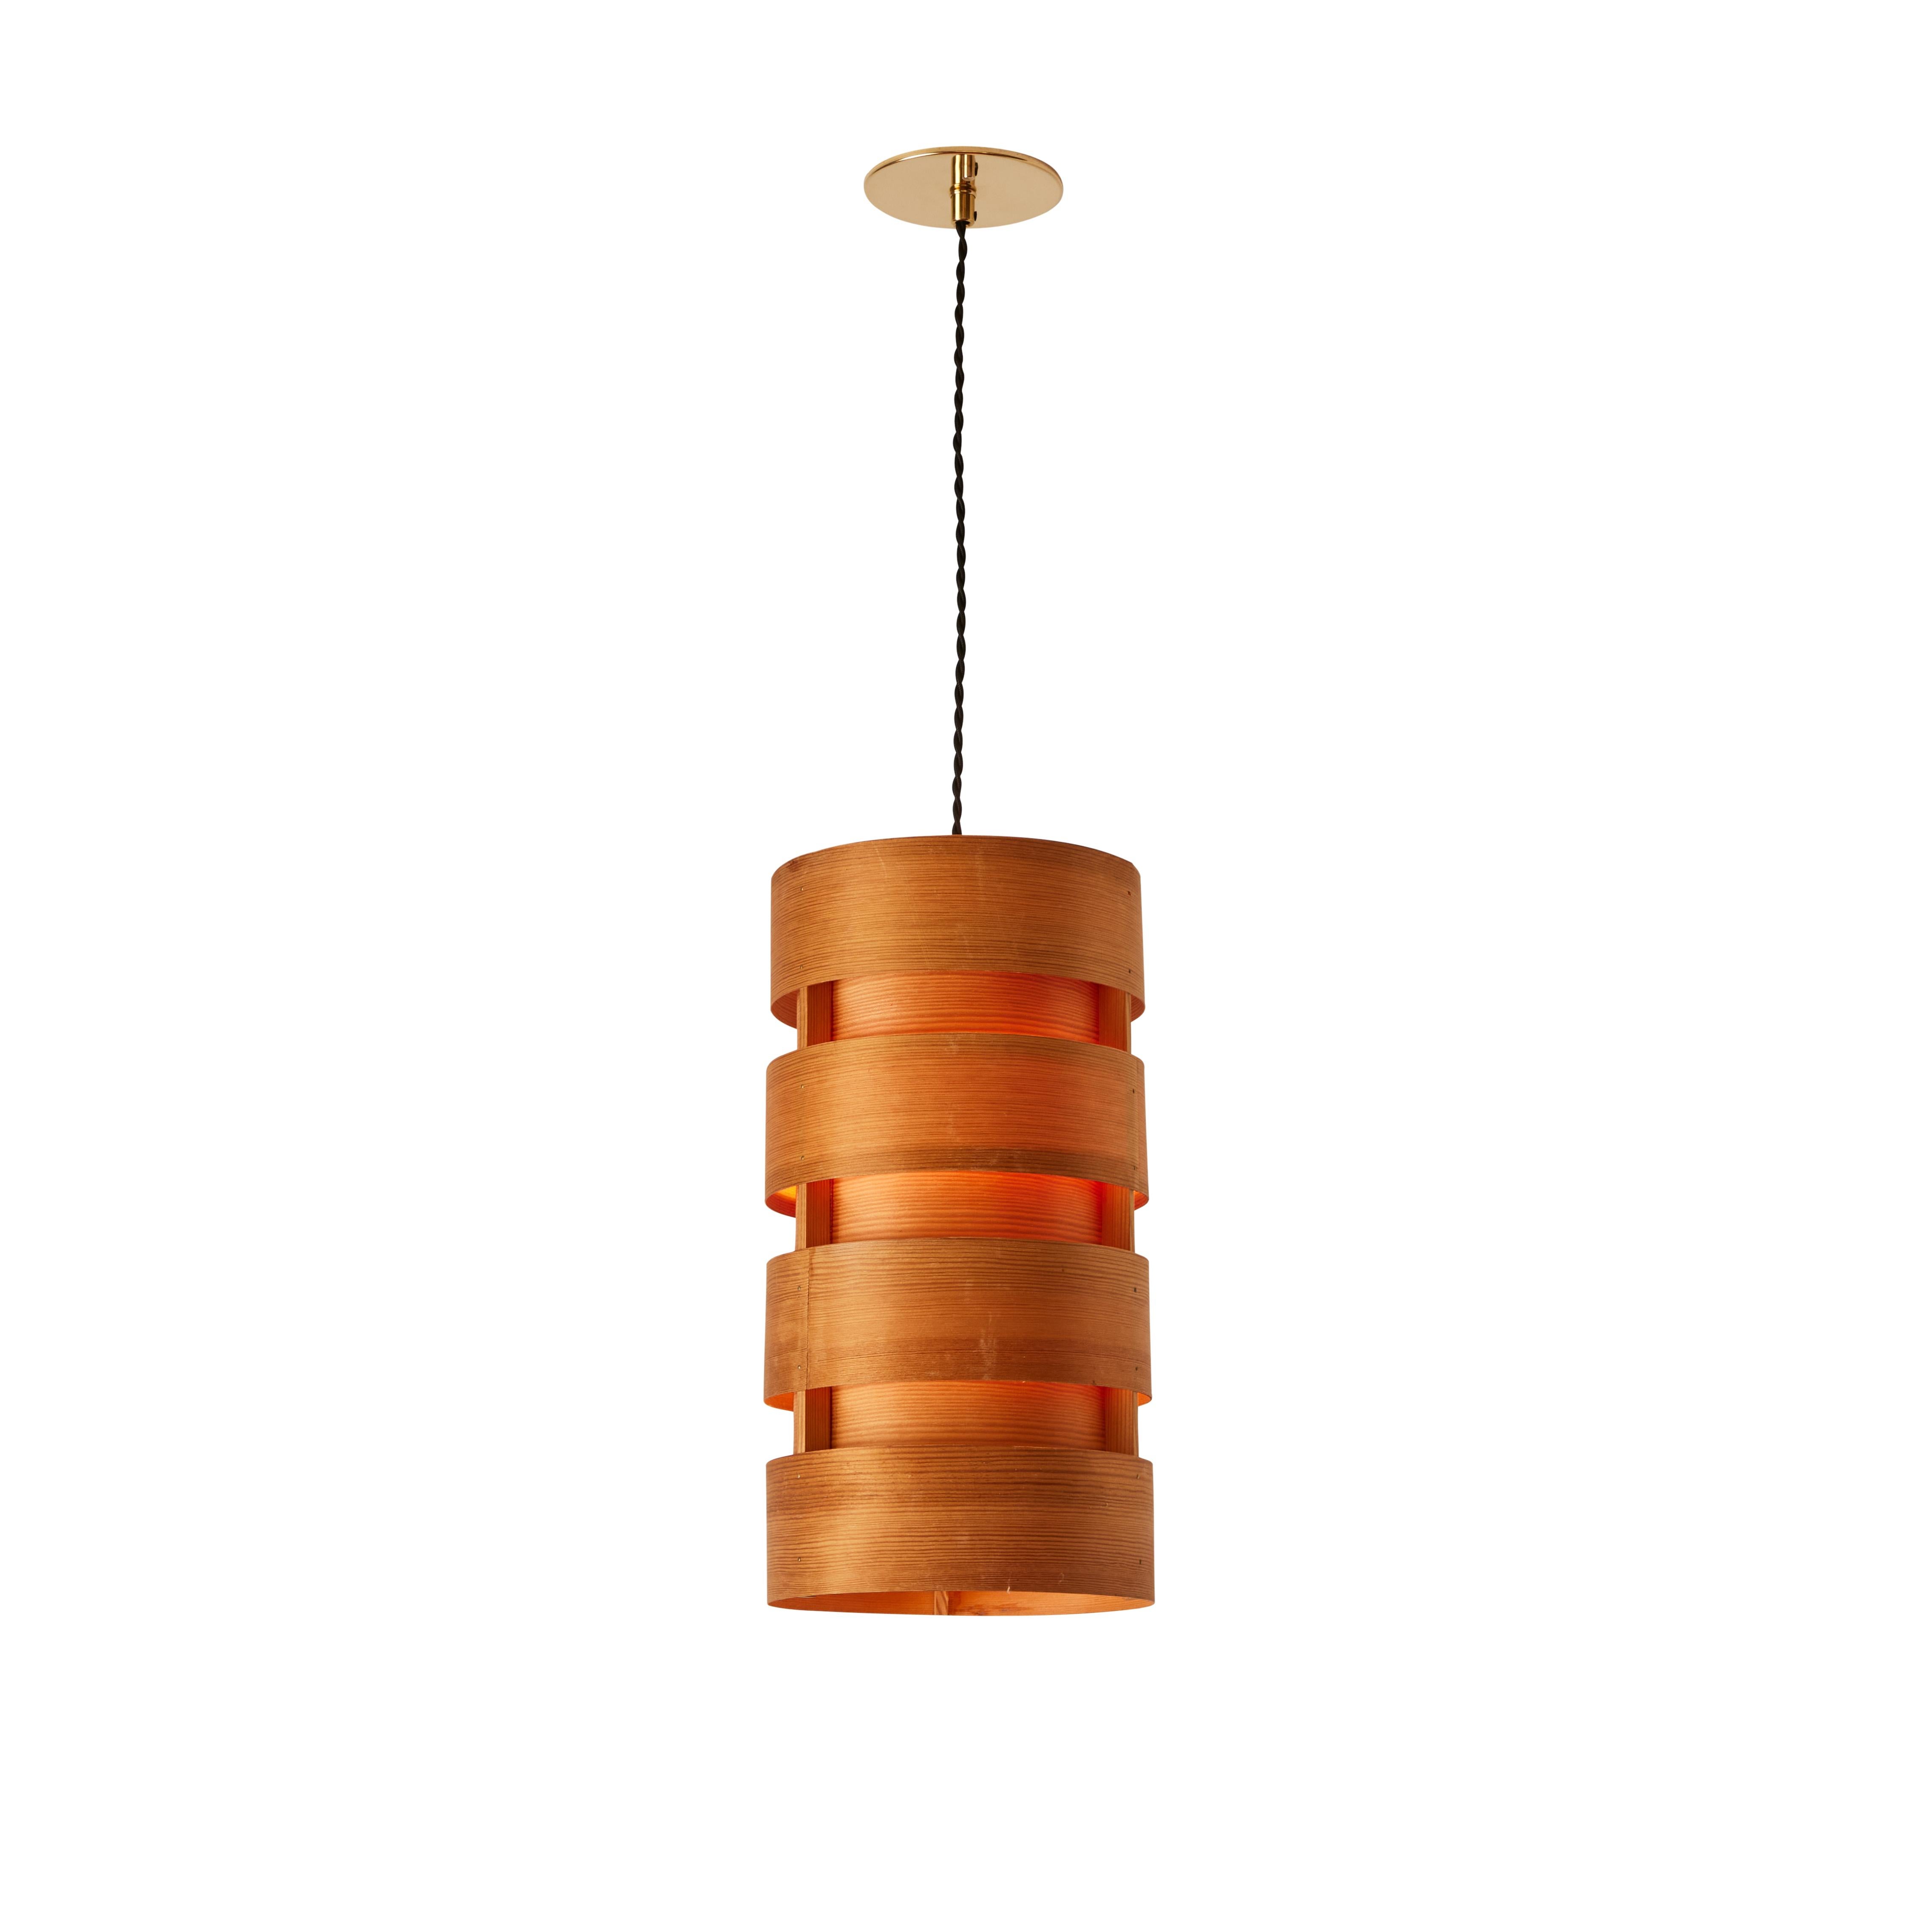 Large 1960s Hans-Agne Jakobsson Cylindrical Bentwood Pendant for AB Ellysett. Designed and produced by Jakobsson in Markaryd, Sweden and executed in thin bentwood with custom cloth cord and thick polished brass canopies for US electrical. A uniquely